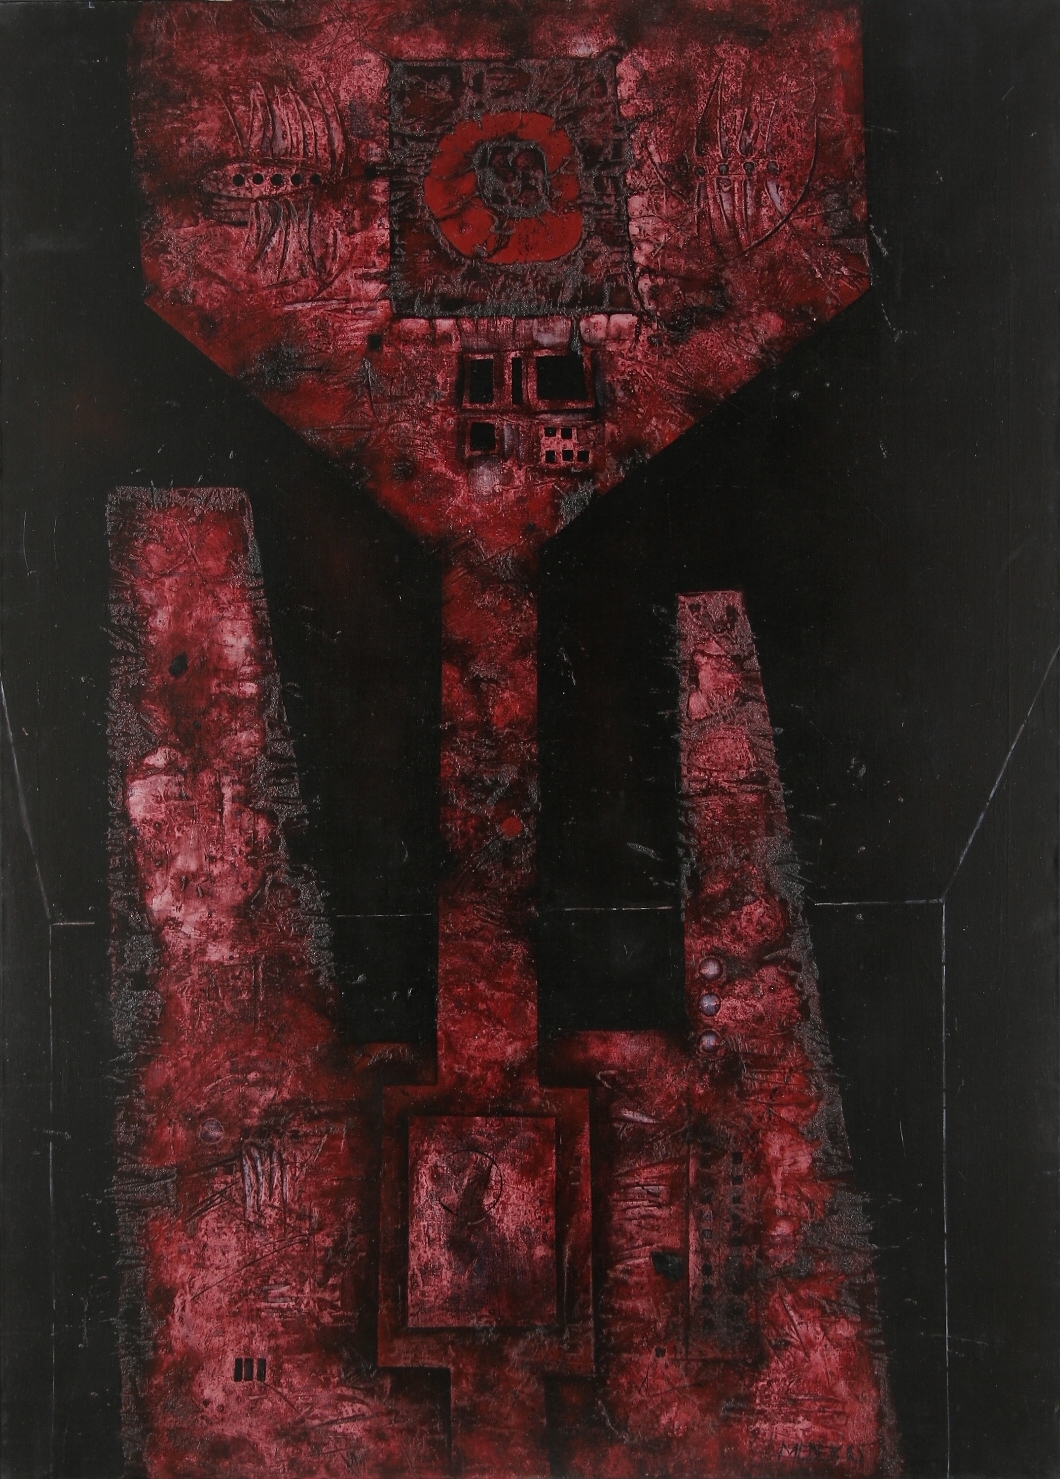 Mikuláš Medek, Too much alcohol, 1965, mixed media on canvas, Inv. nr. O00993